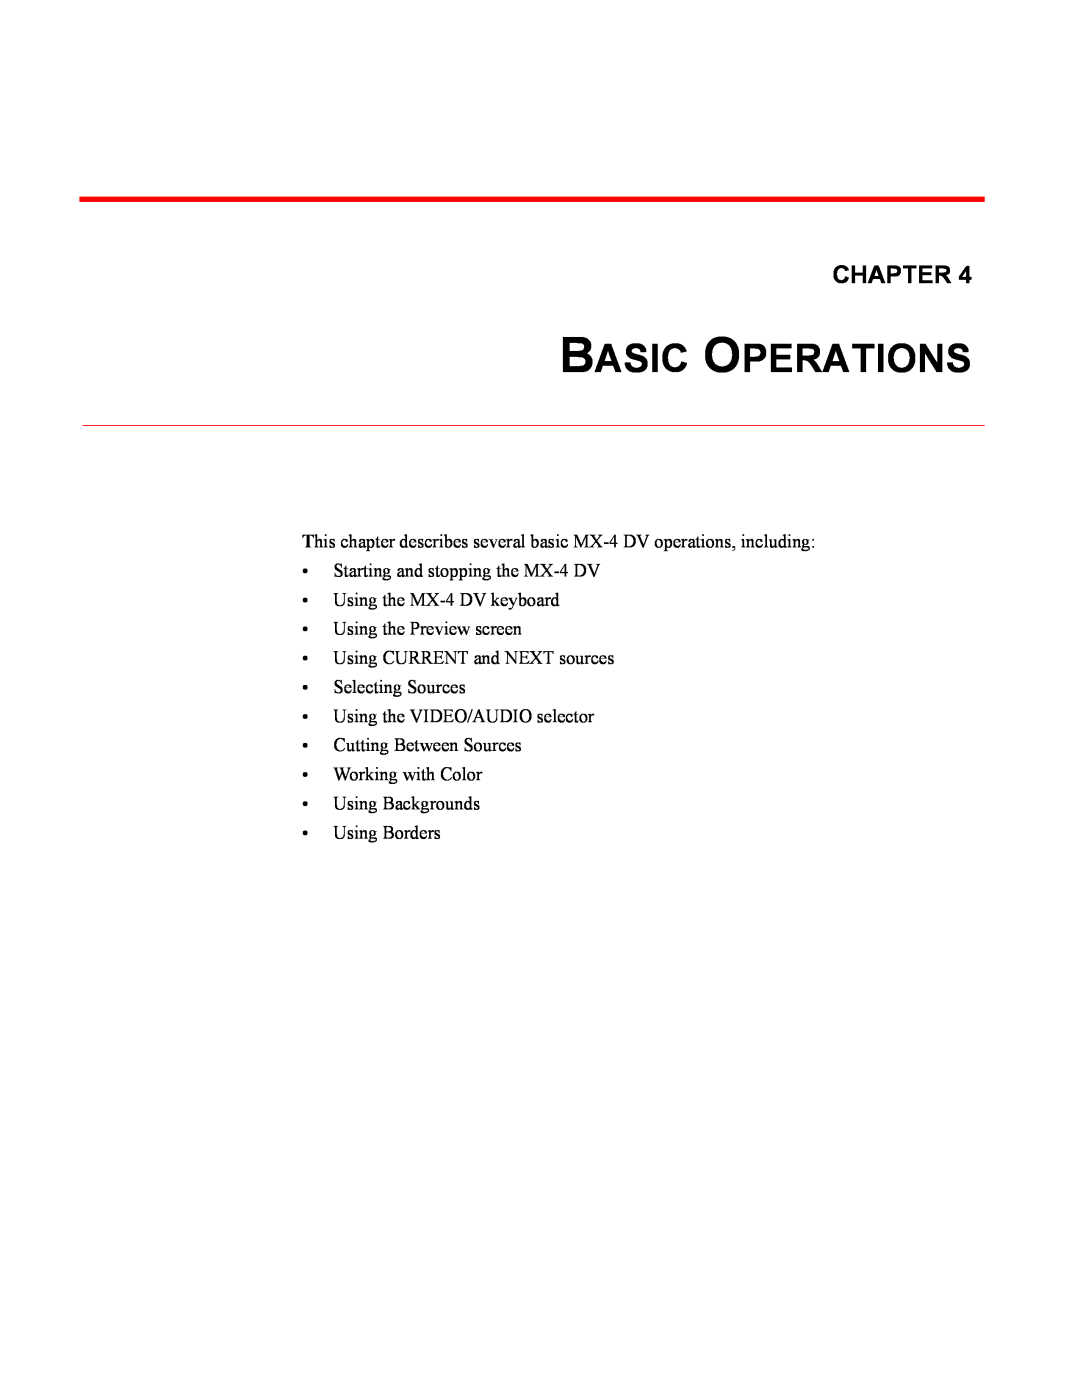 FOCUS Enhancements MX-4DV Basic Operations, Chapter, This chapter describes several basic MX-4 DV operations, including 